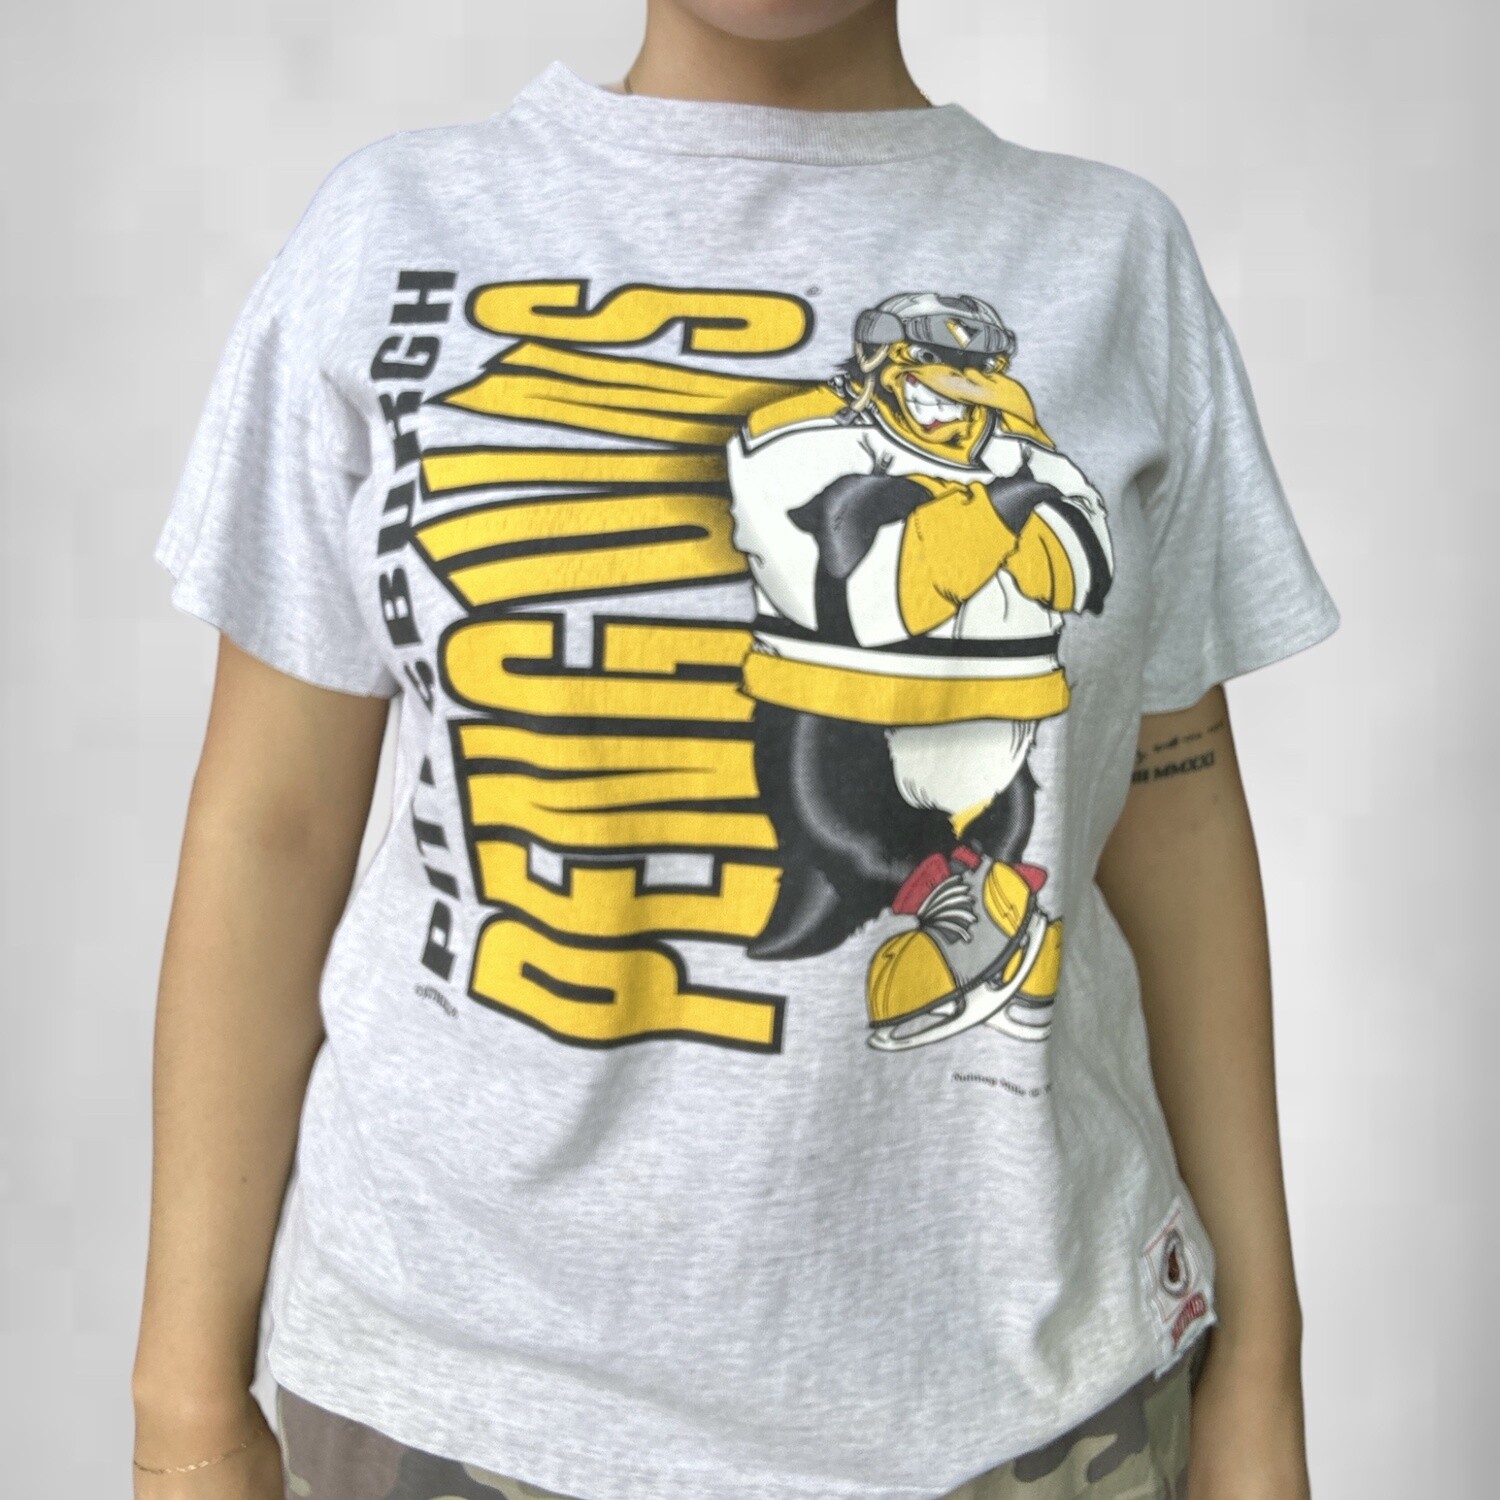 Vintage 1994 Penguins Nutmeg Tee, Size: XL, Color: Grey, Style: Pittsburgh